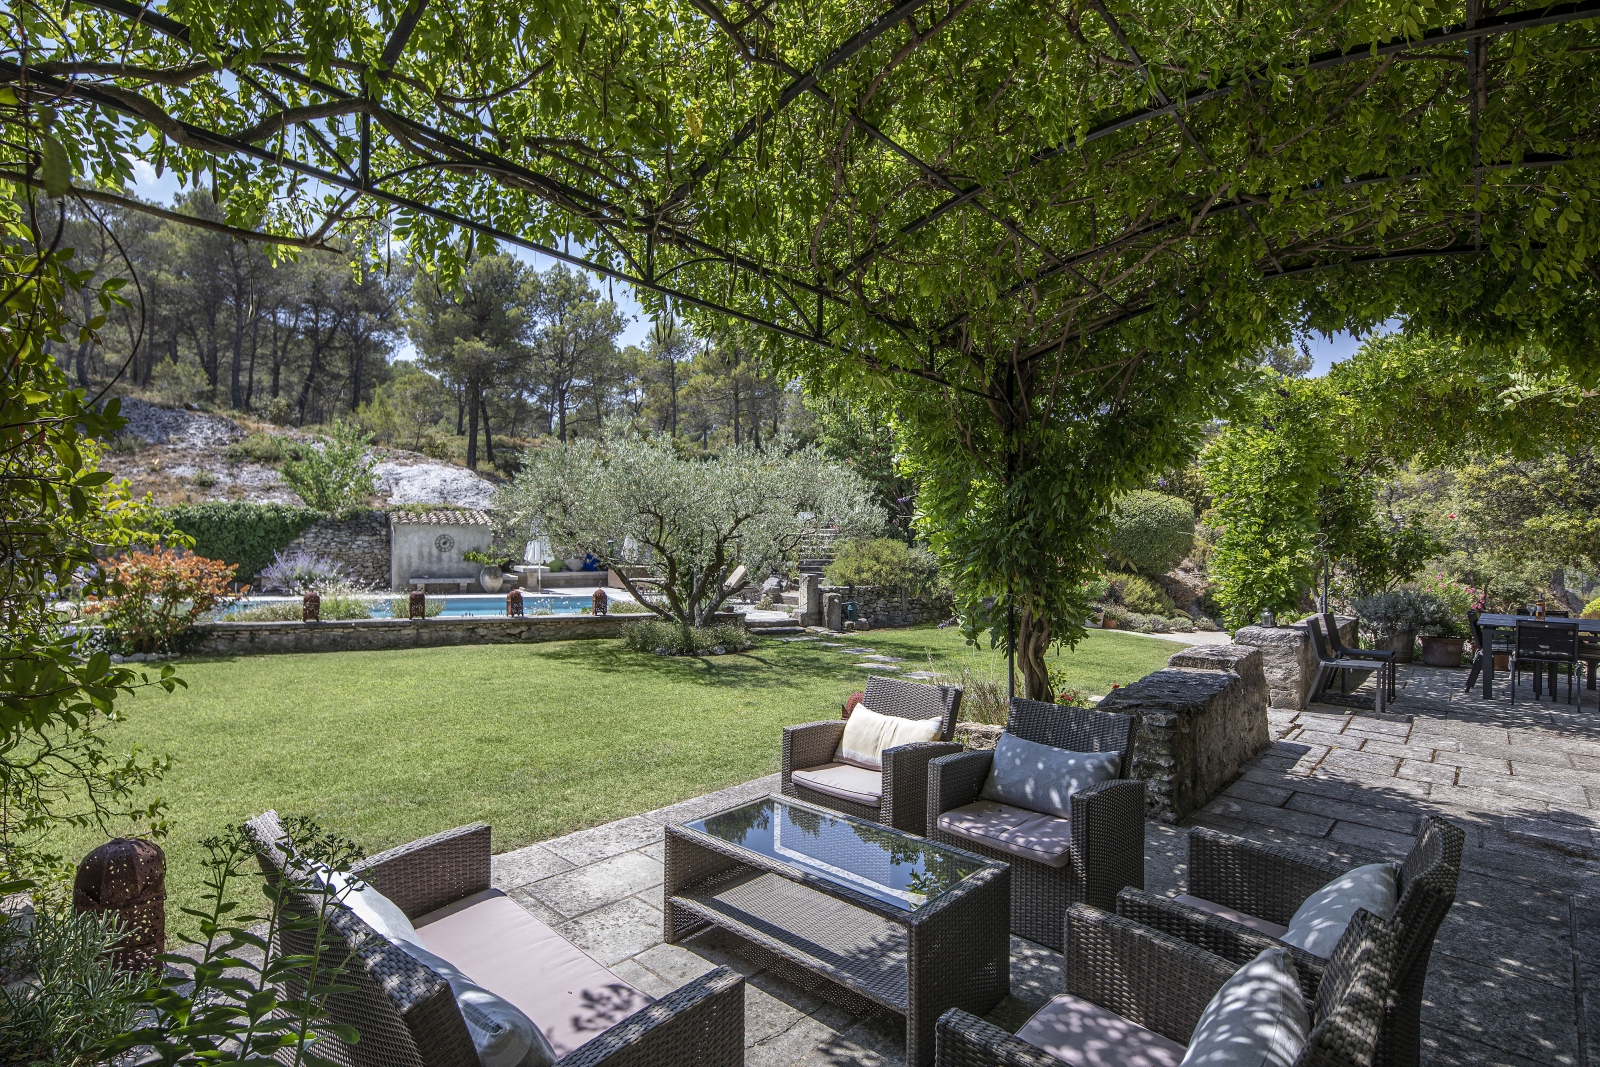 Outdoor lounge area with vines, sofas, armchairs, coffee table and view of pool and garden at Mas Cecile in Provence, France